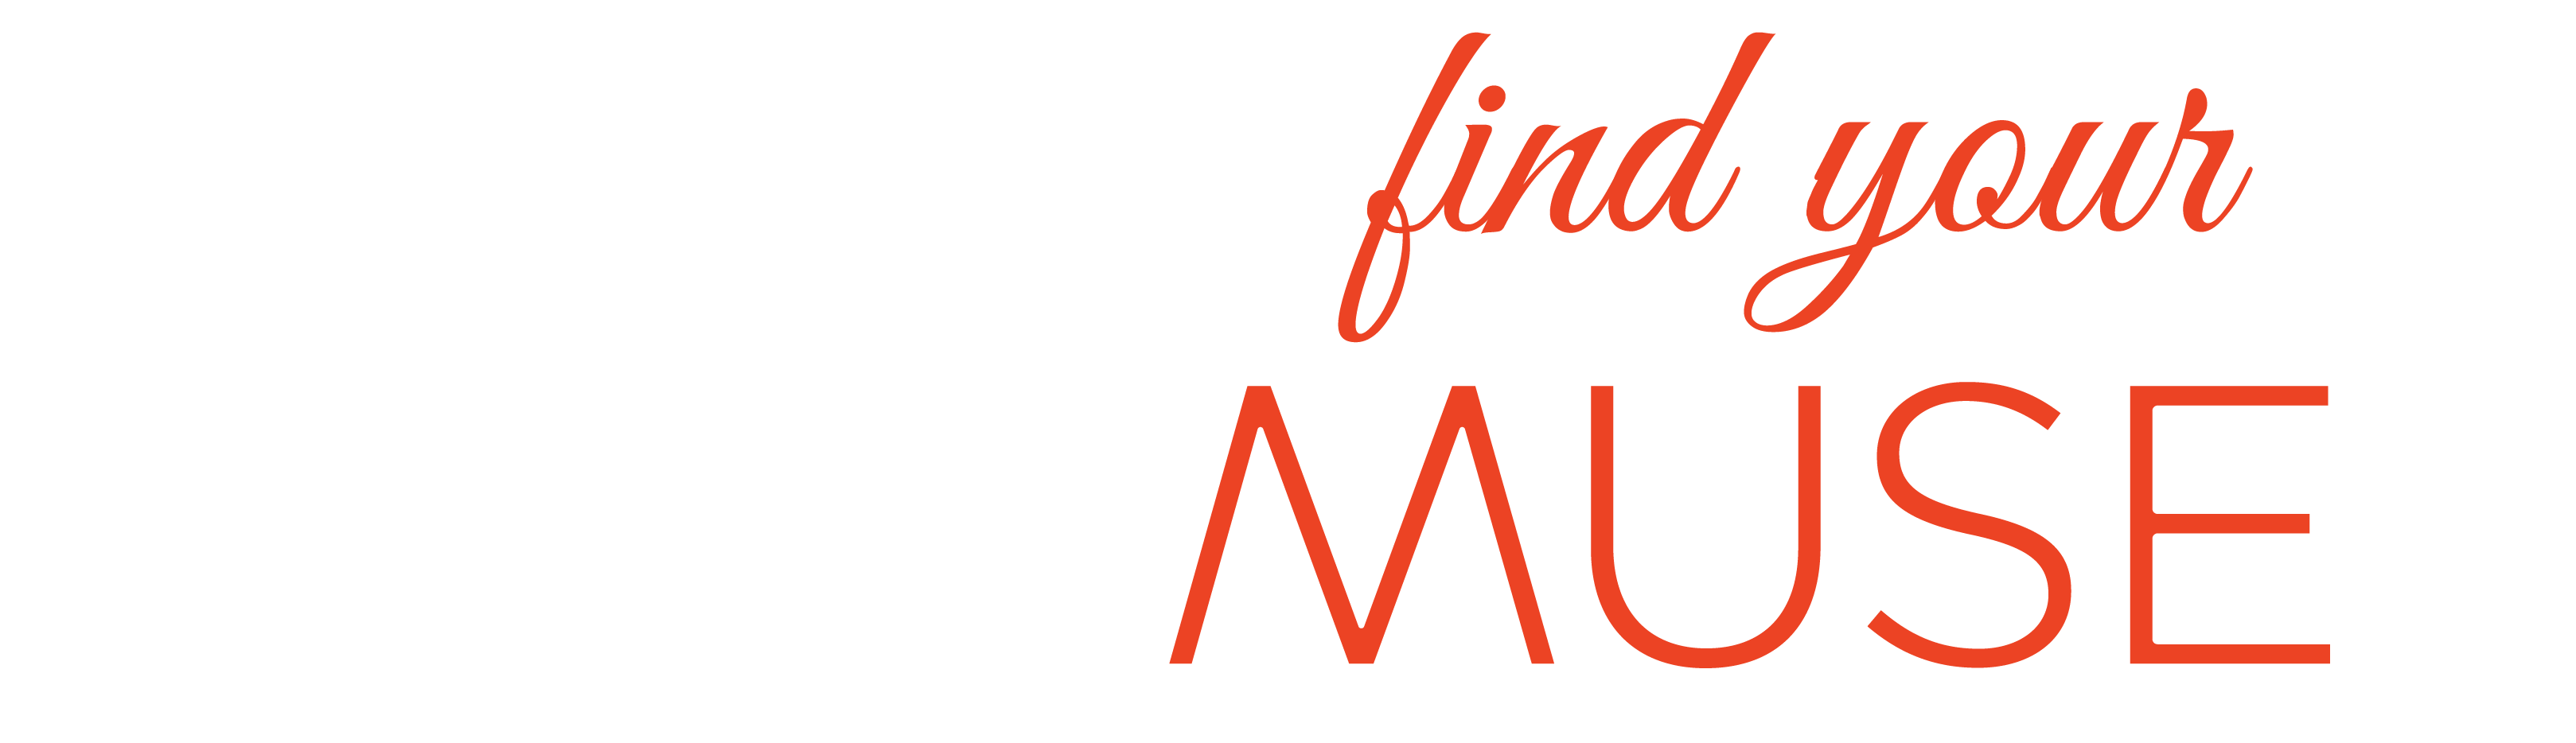 find your MUSE - red on white